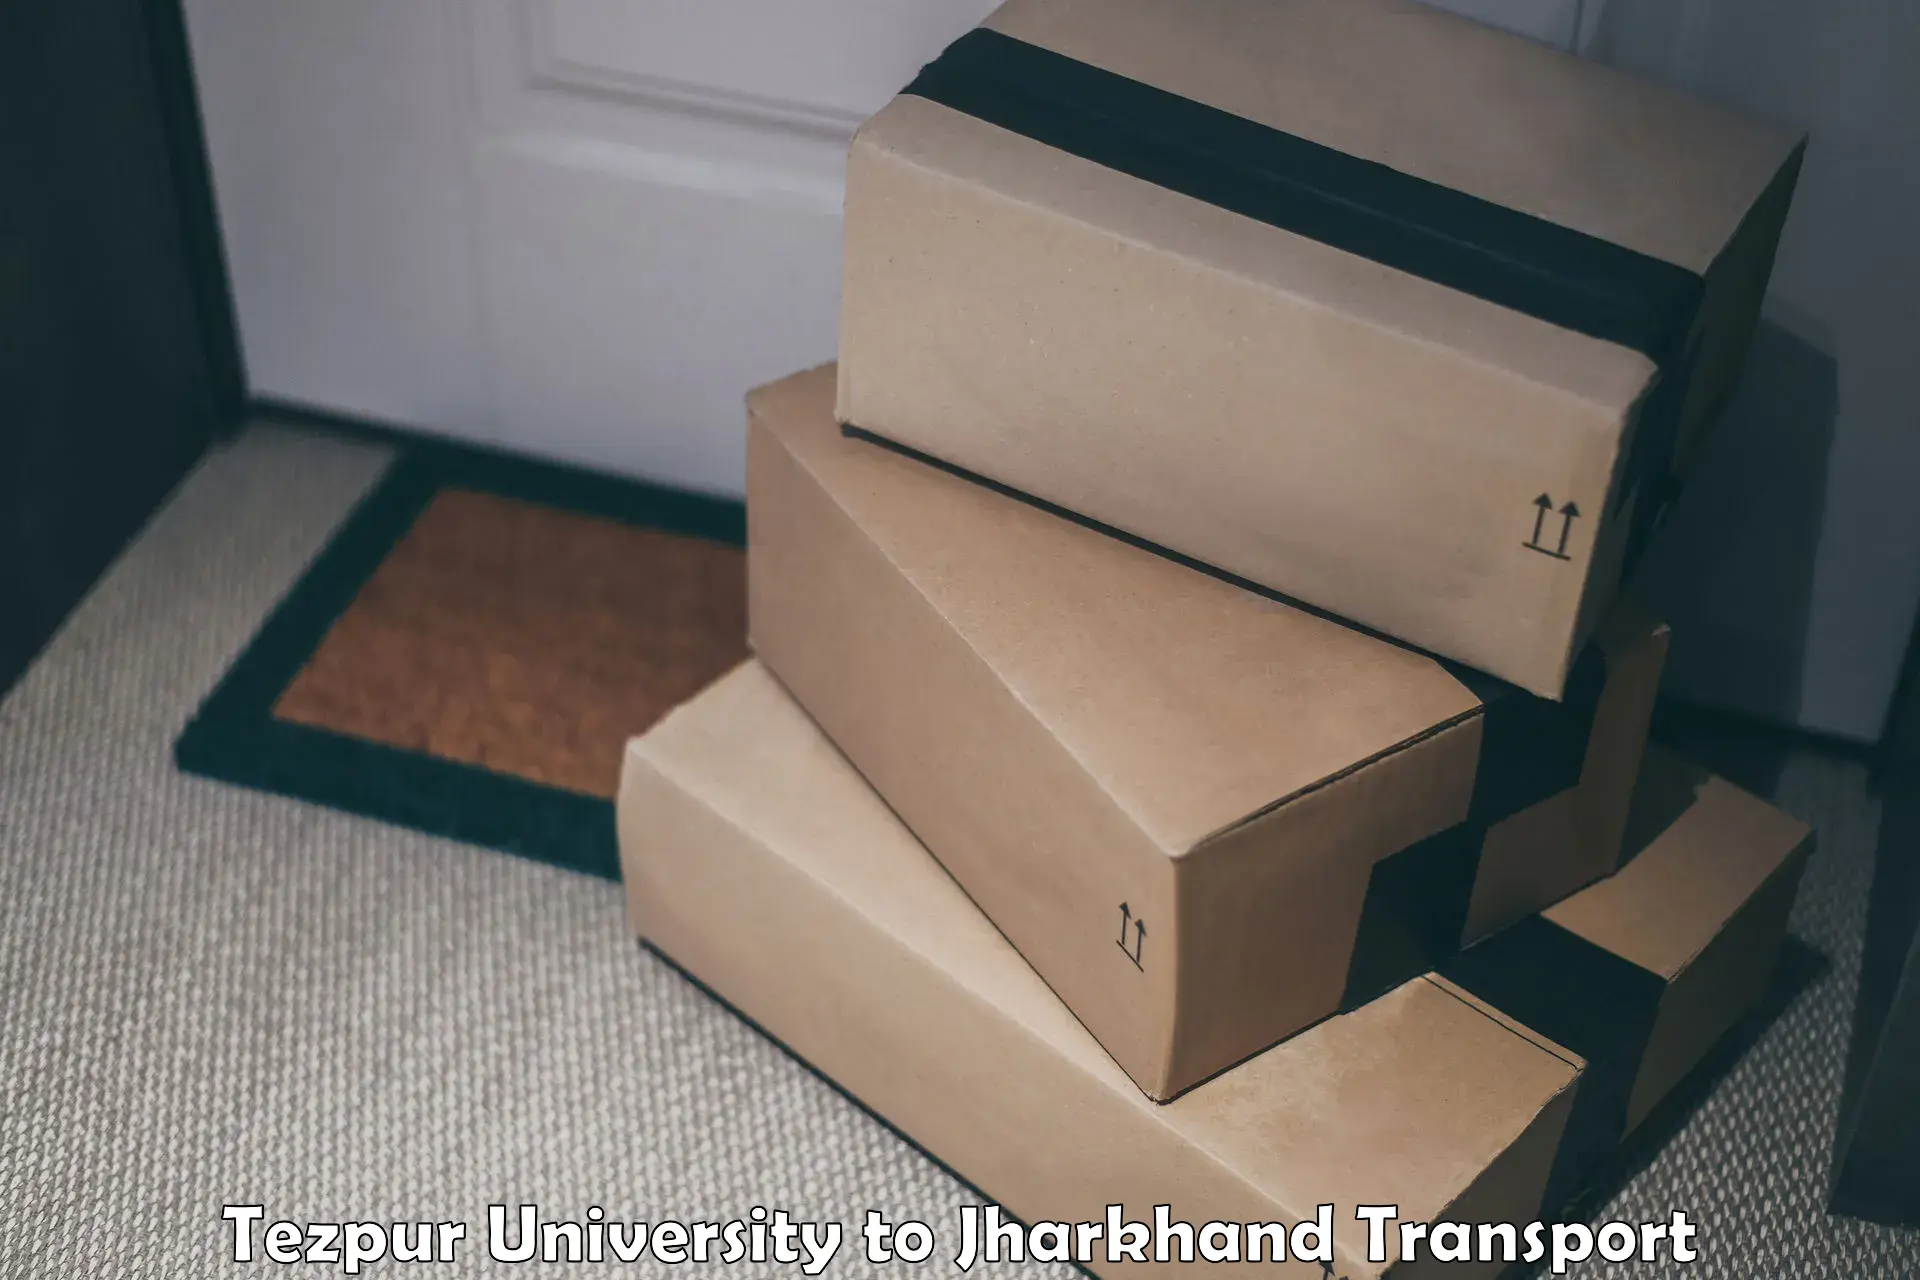 Container transport service Tezpur University to Jharkhand